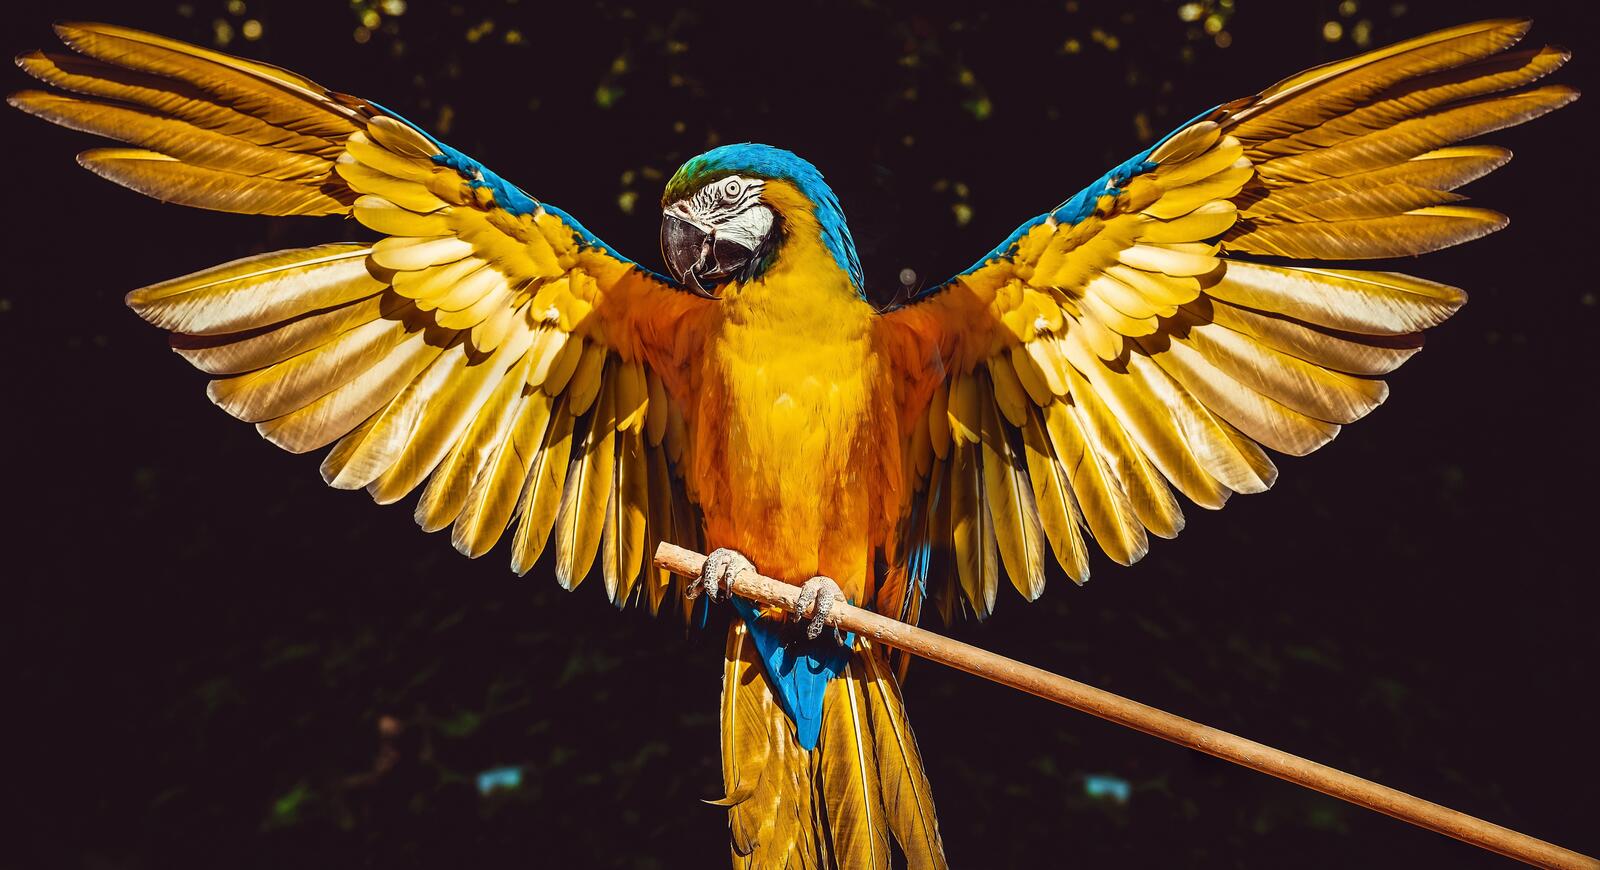 Wallpapers yellow parrot wings feathers on the desktop